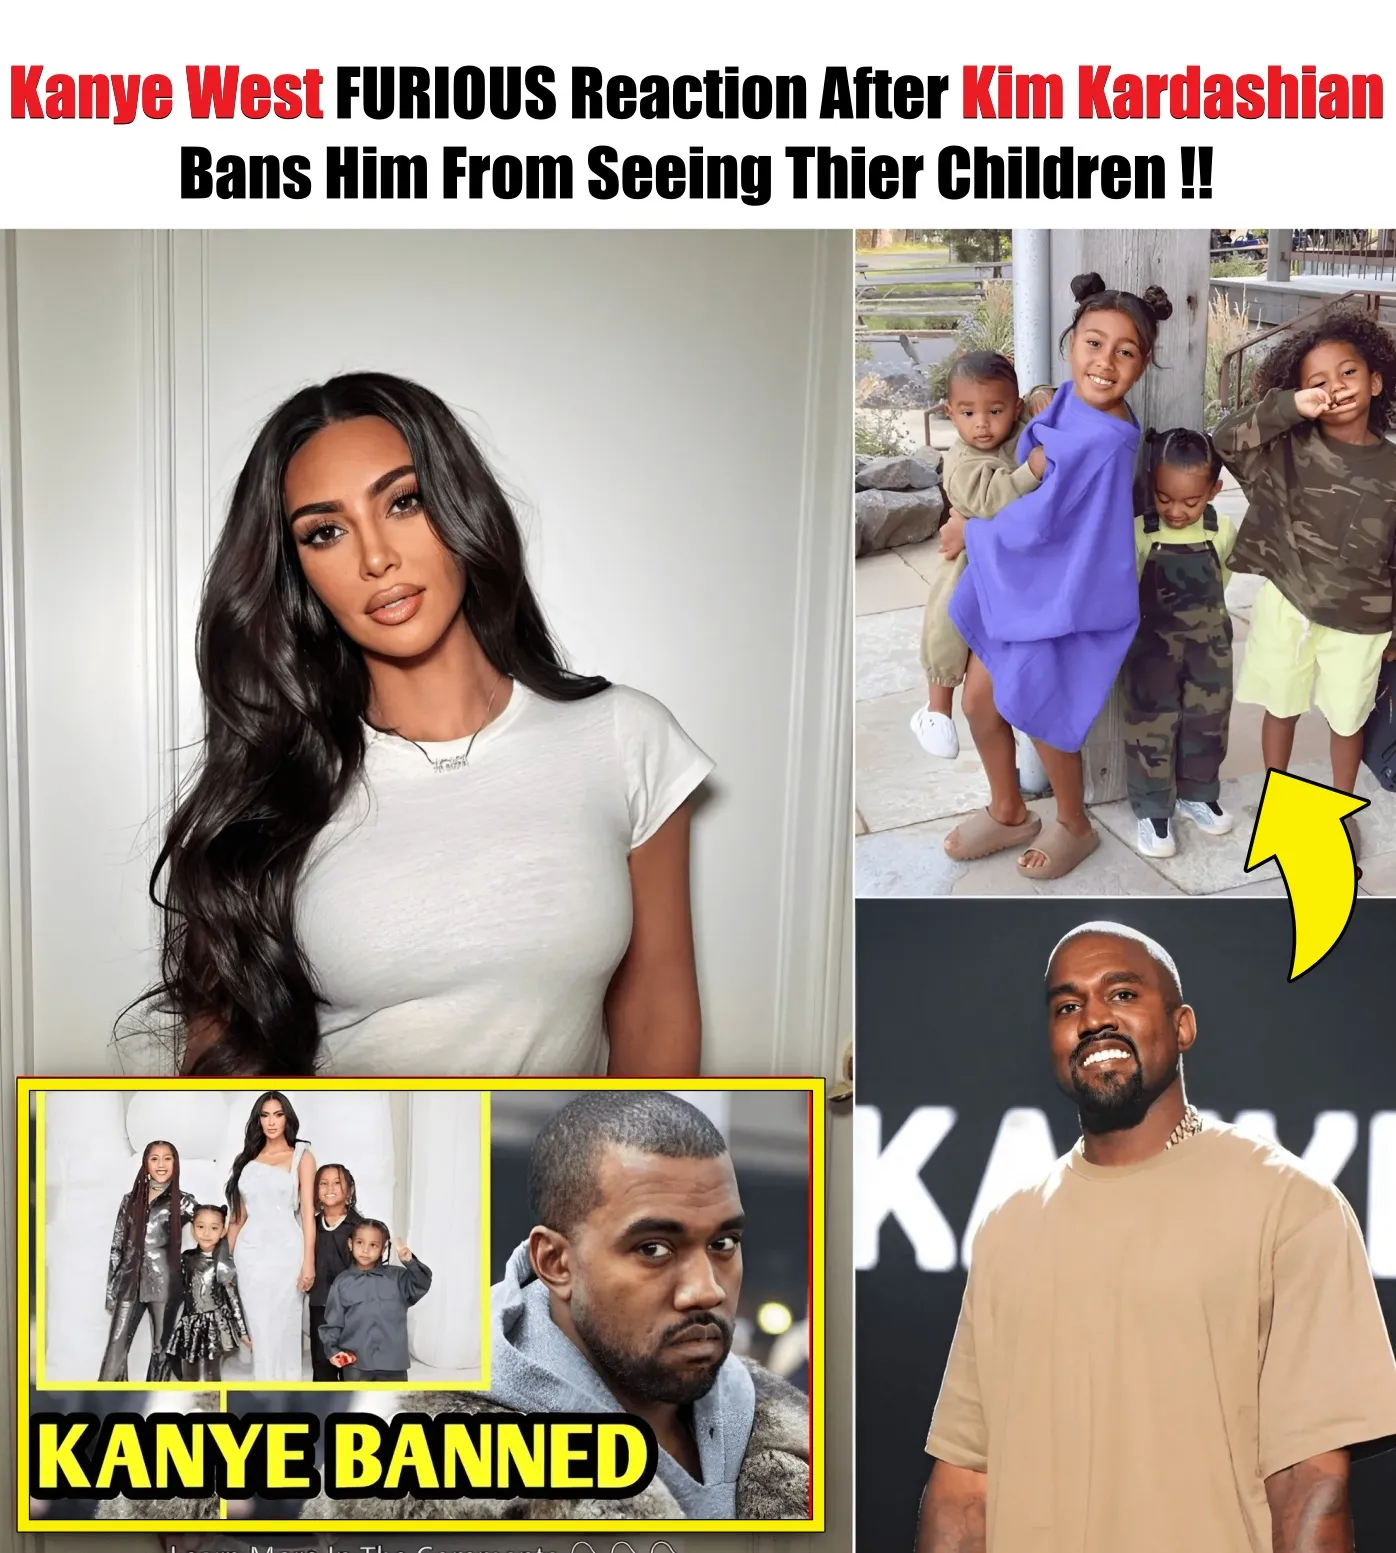 Cover Image for Kanye West FURIOUS Reaction After Kim Kardashian Bans Him From Seeing Thier Children